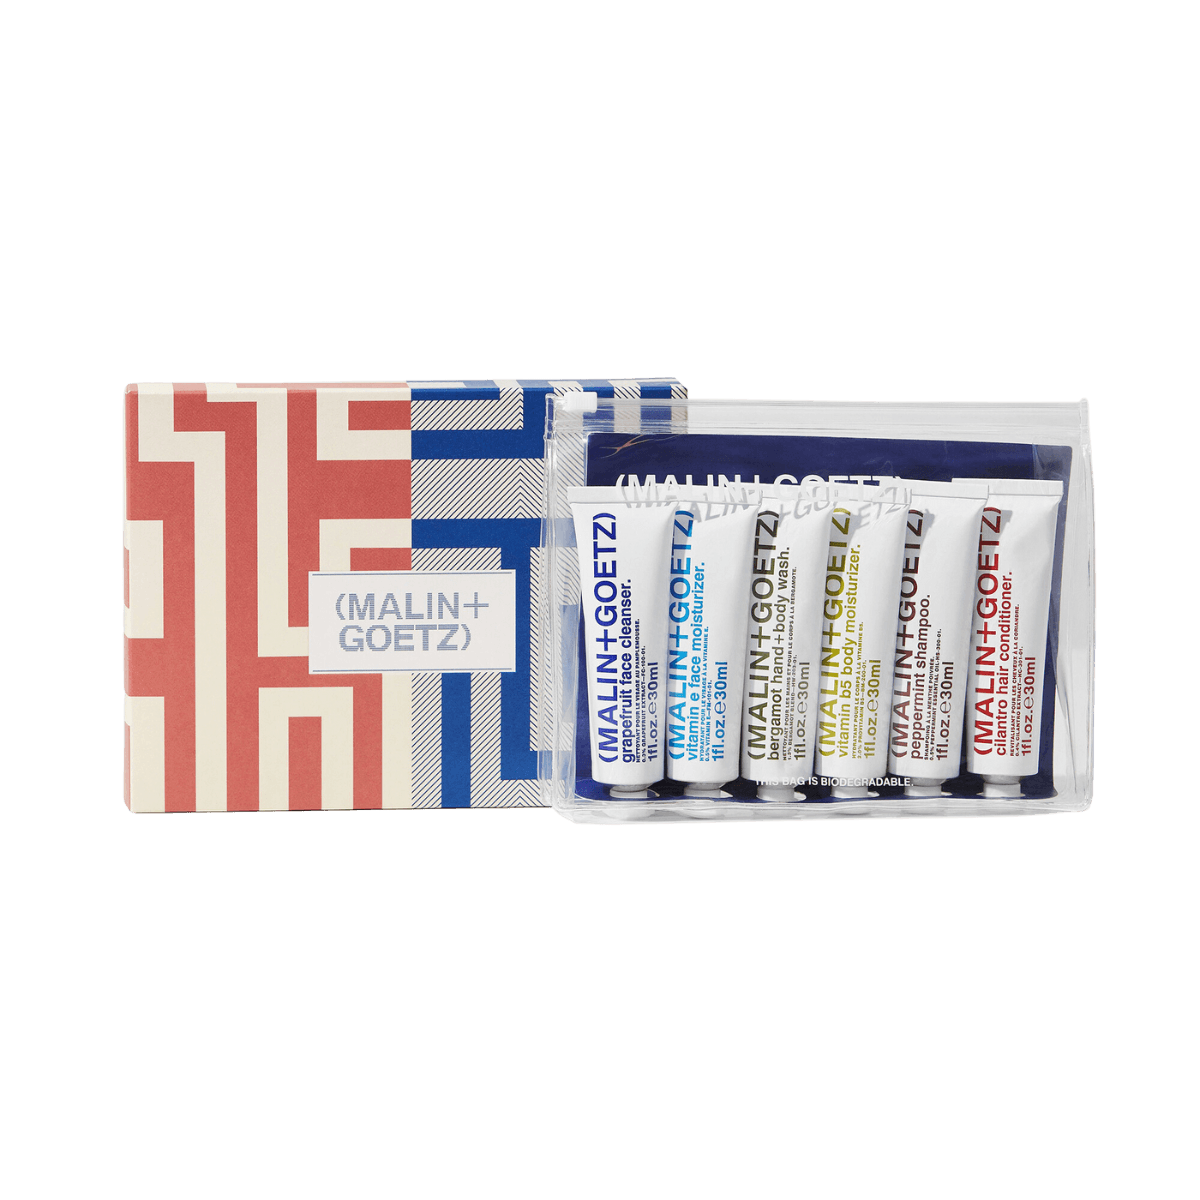 Image of Bestsellers travel kit holiday edition by the perfume brand Malin+Goetz